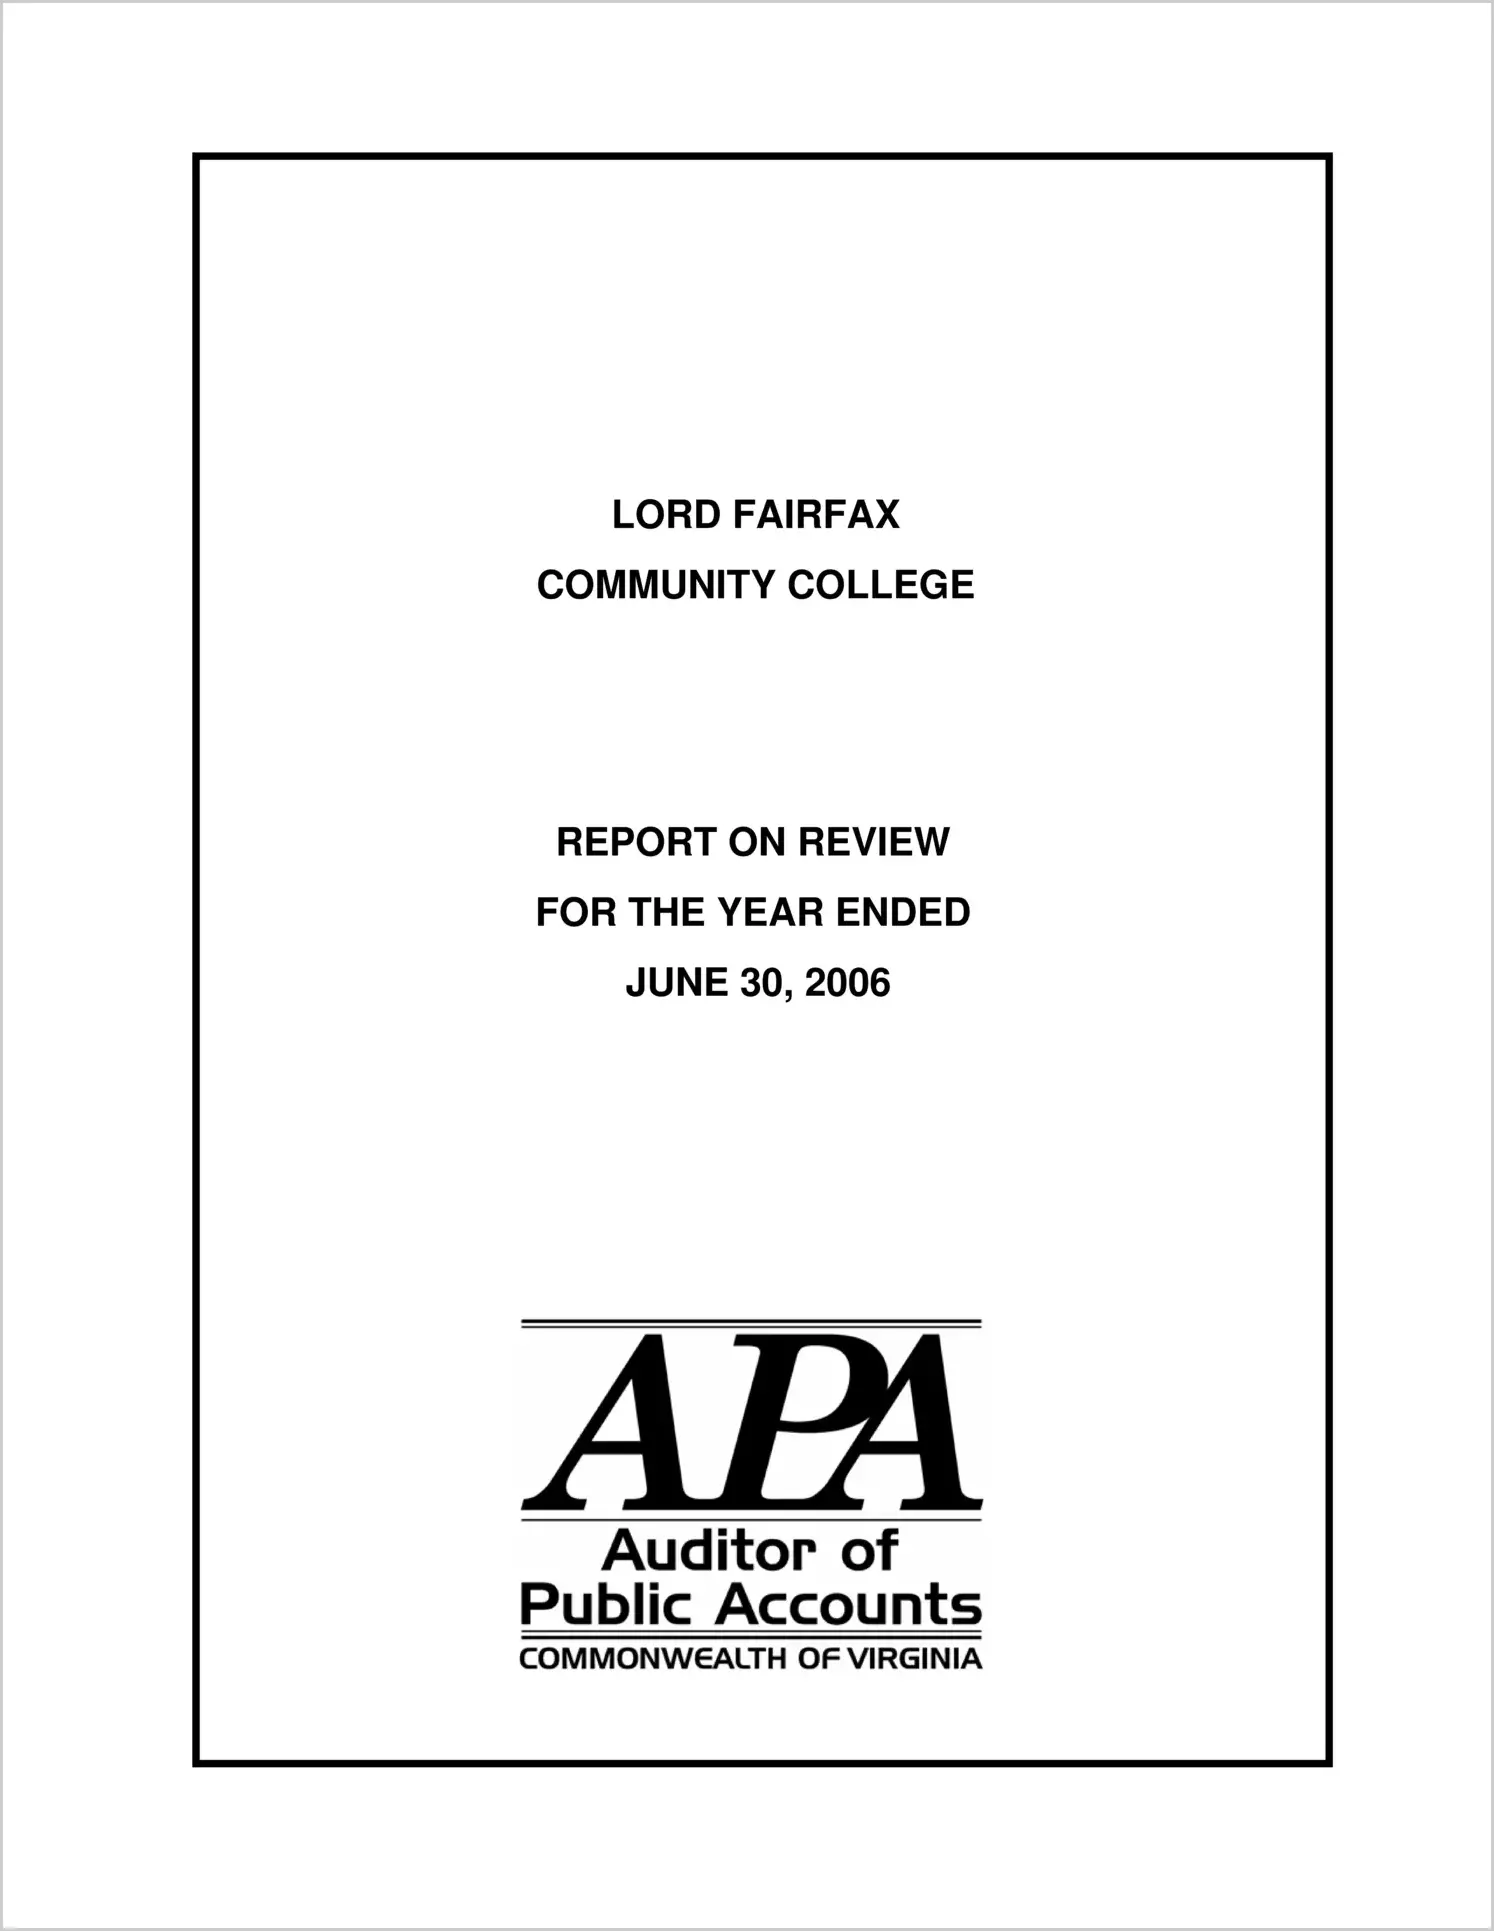 Lord Fairfax Community College Report on Review for the Year Ended June 30, 2006